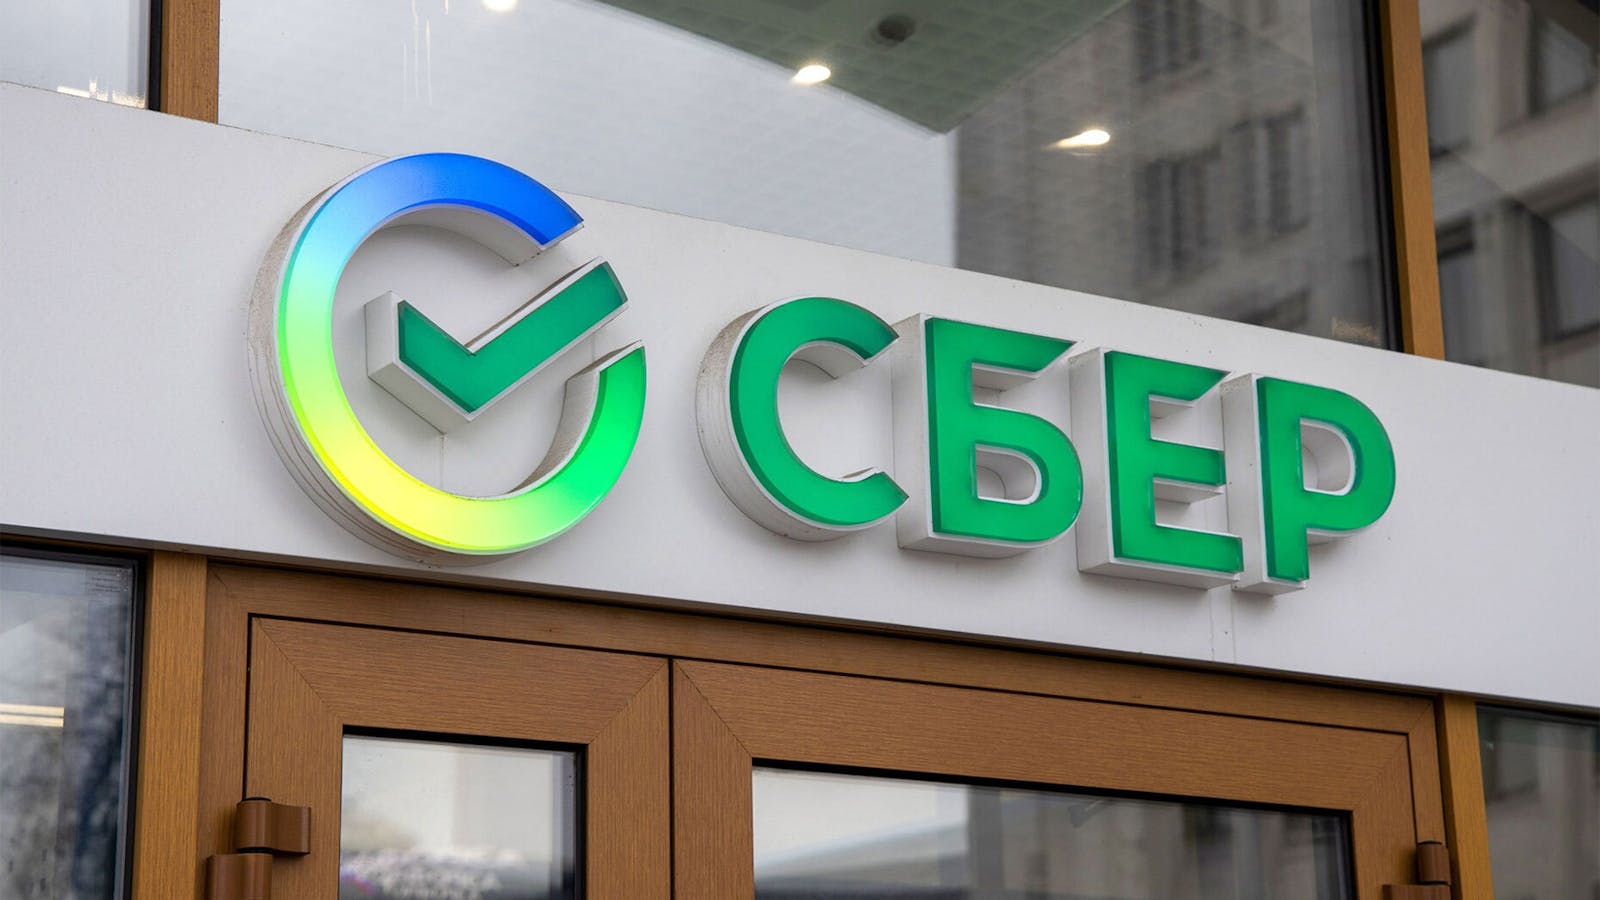 A sign above the entrance to a Sberbank of Russia PJSC bank branch in Moscow. Sberbank is a limited partner in at least one fund that invests in U.S. startups. Photo by Bloomberg